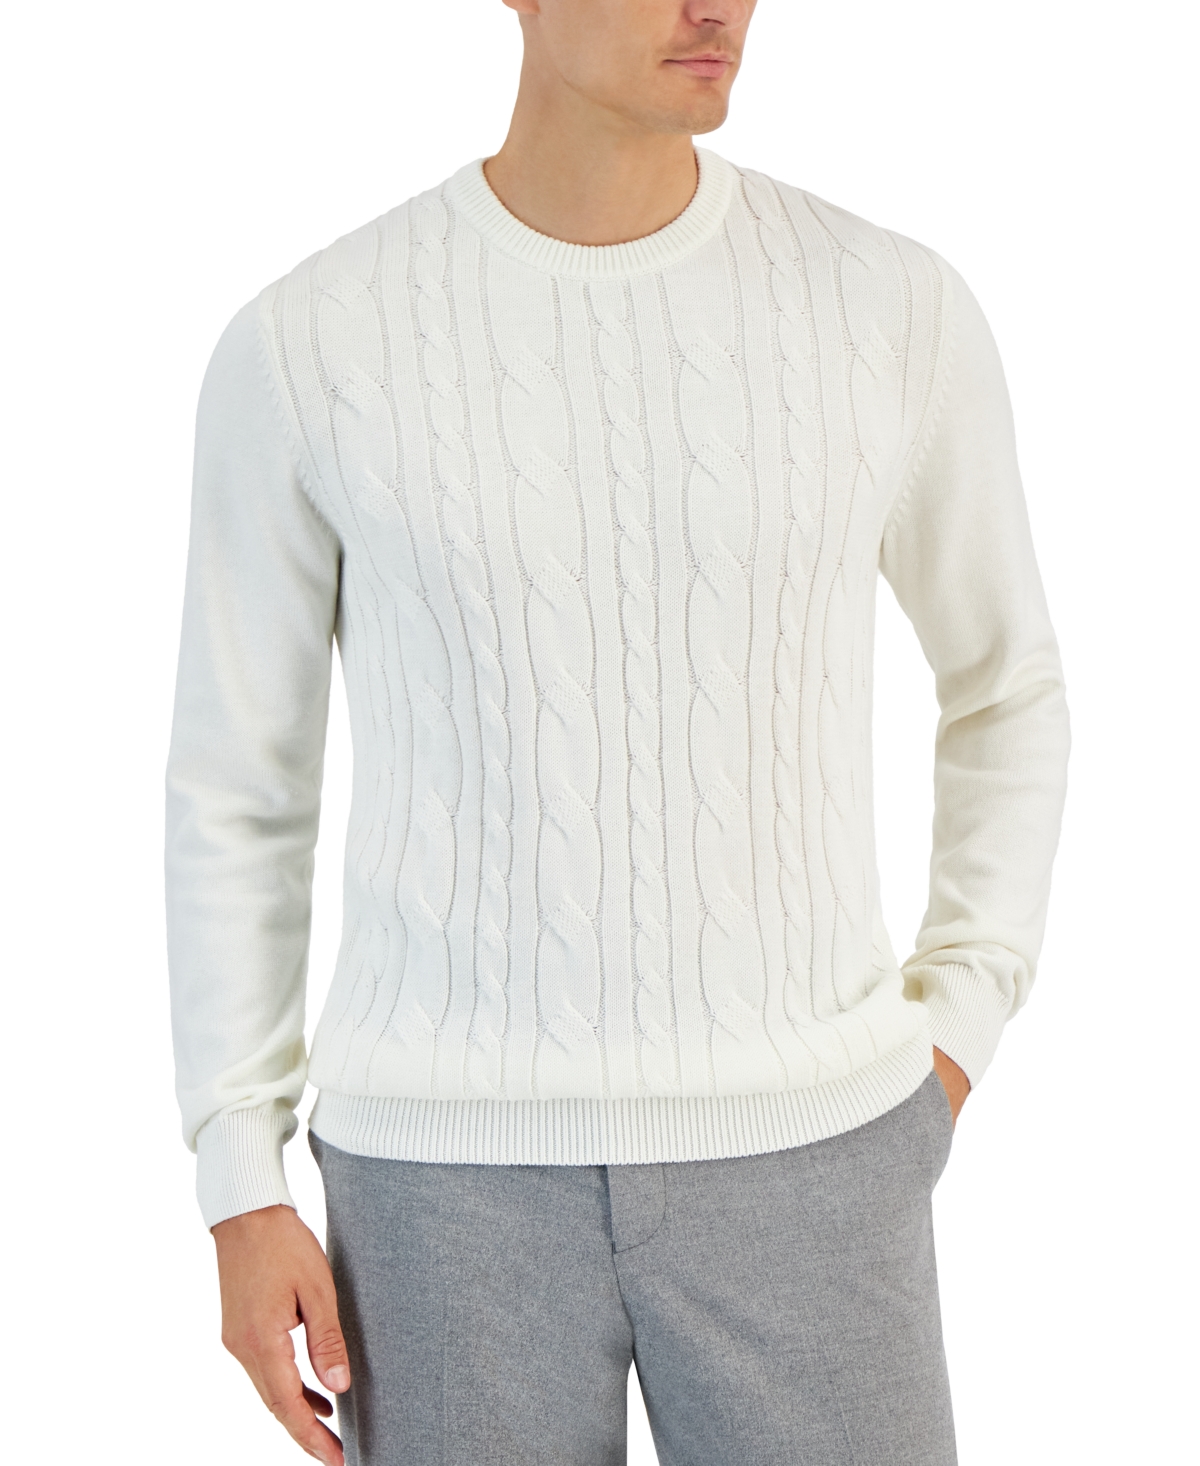 Men's Elevated Mixed Cable Long Sleeve Crewneck Sweater, Created for Macy's - Winter Ivory